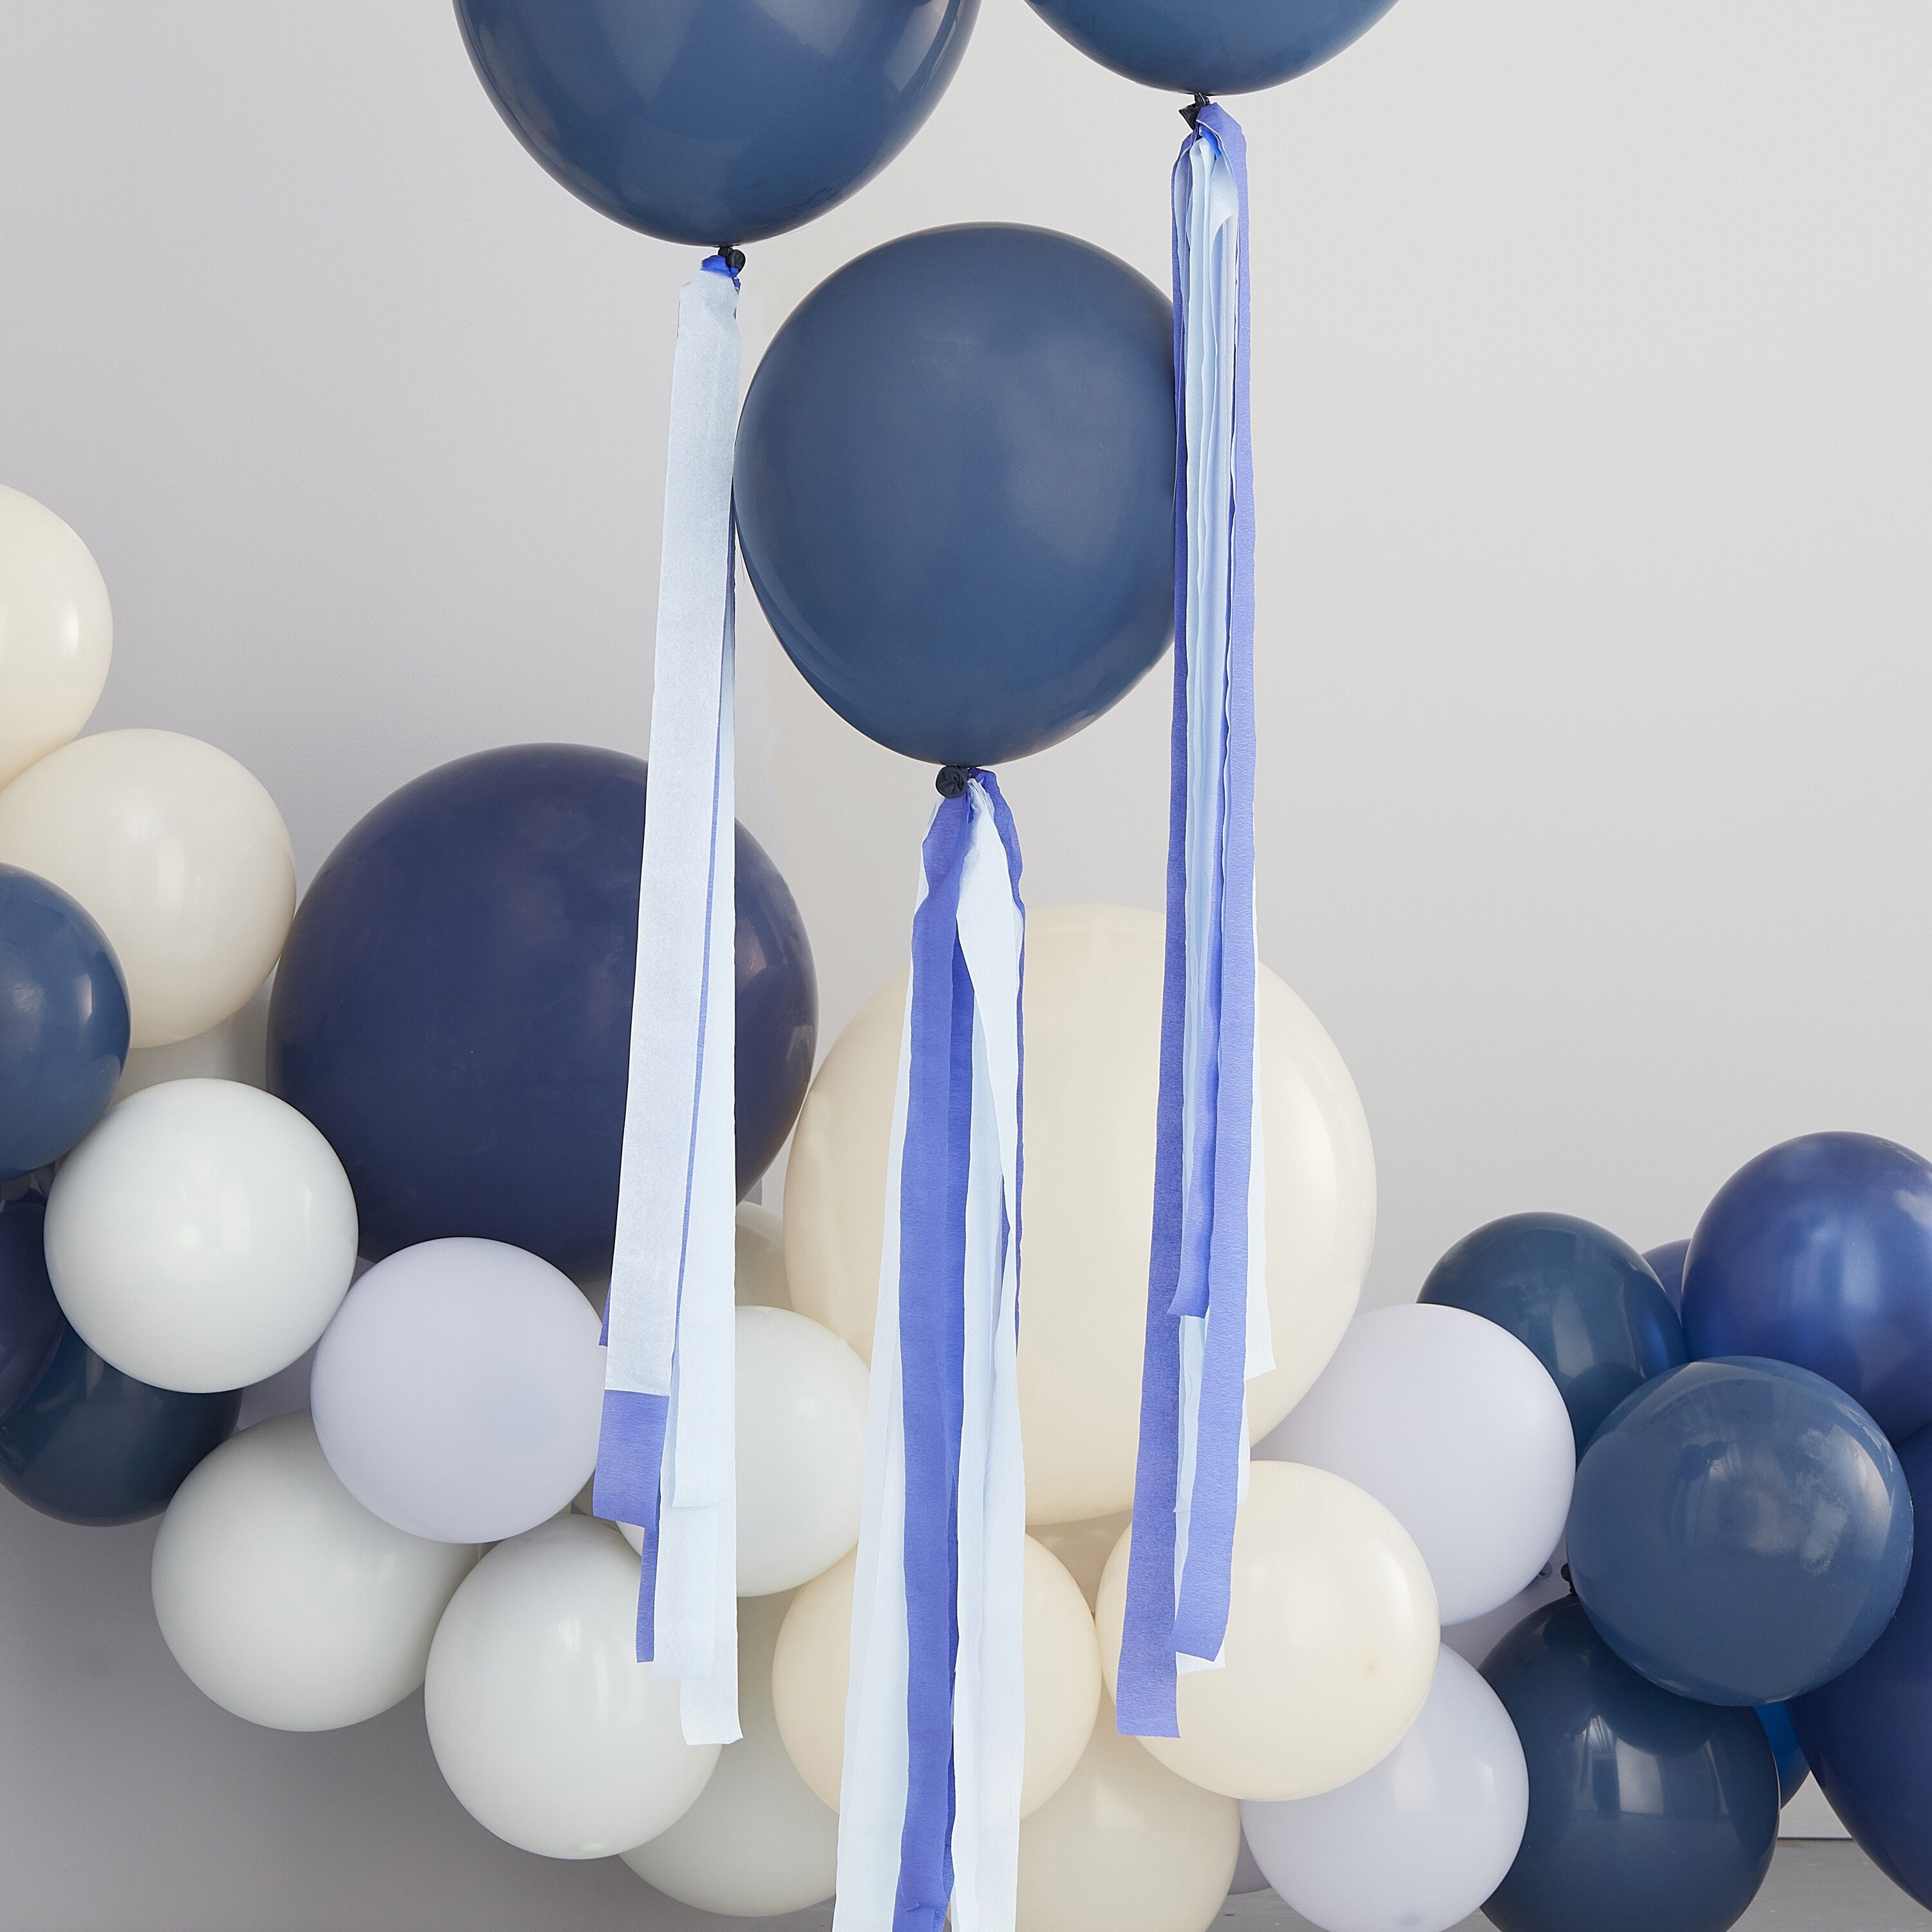 Buy Balloon Tails Online In India -  India